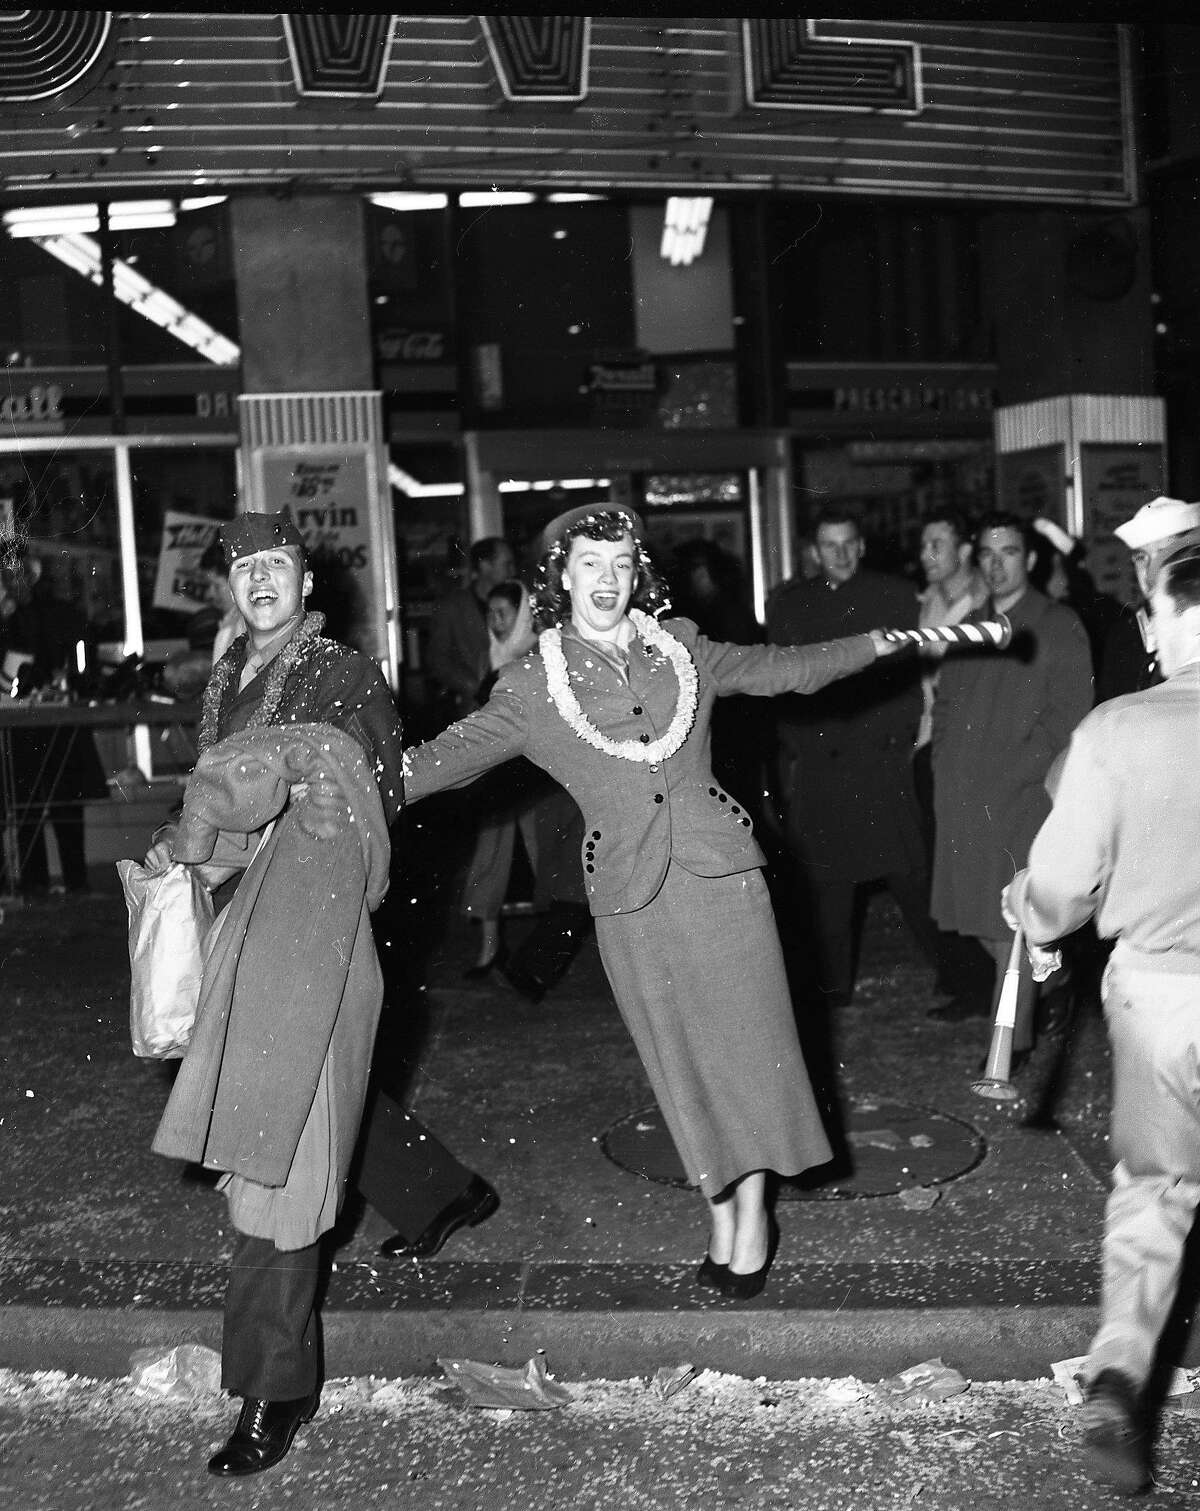 The confetti flies at New Year's Eve celebrations on Market Street in San Francisco, December 31, 1952